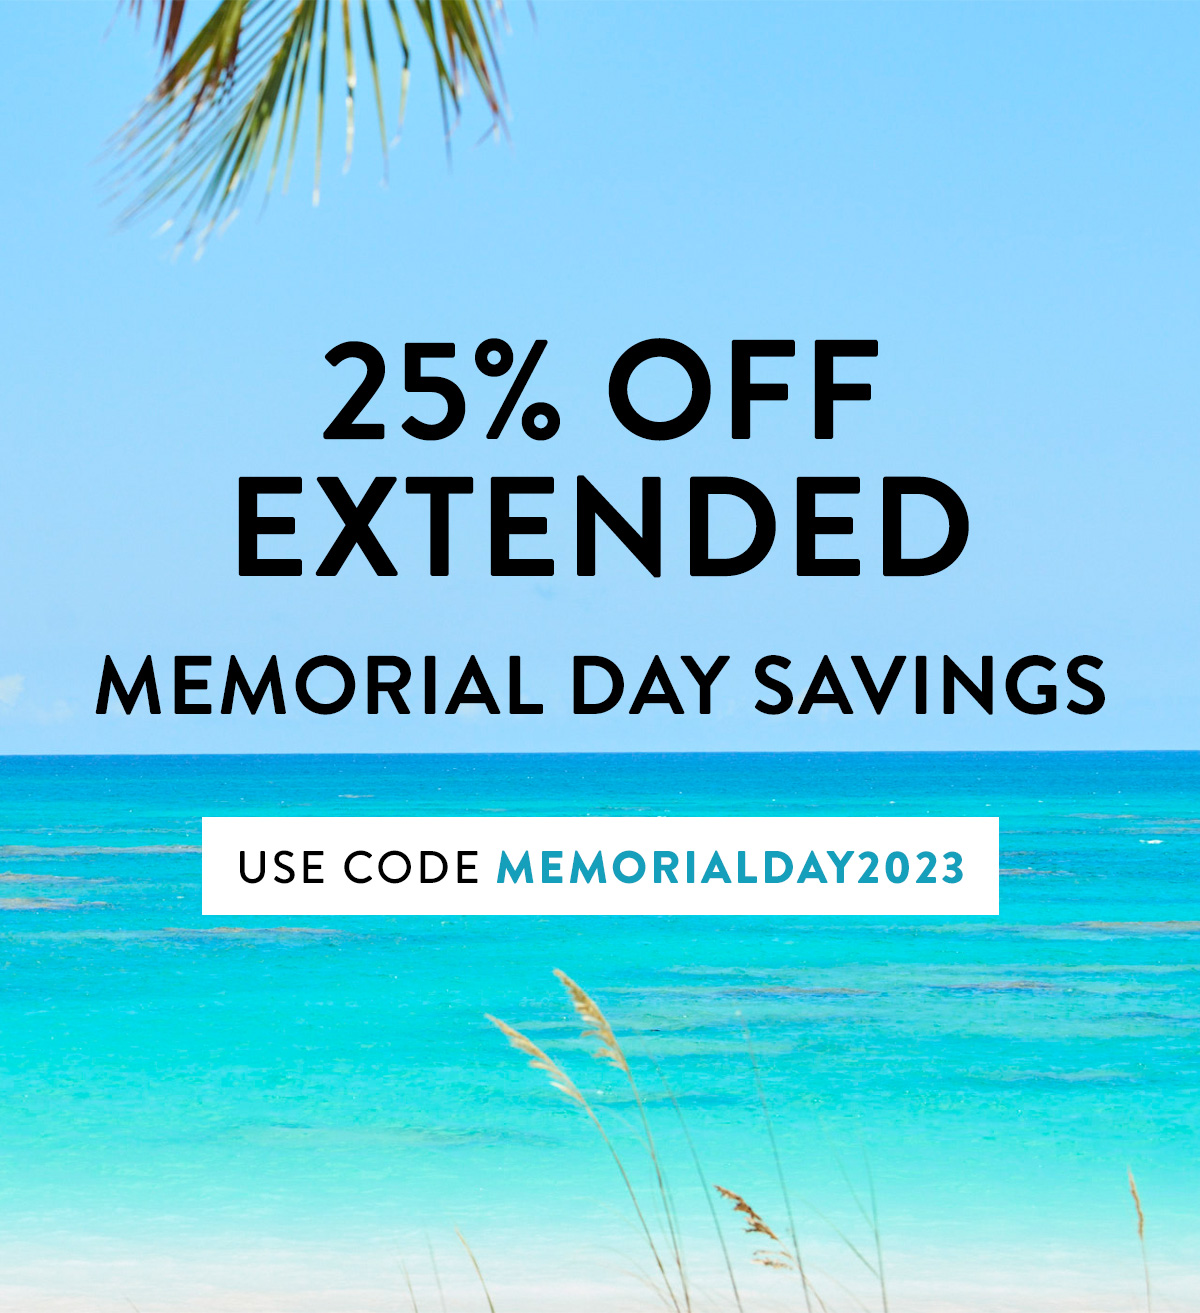 25% OFF EXTENDED MEMORIAL DAY SAVINGS USE CODE MEMORIALDAY2023